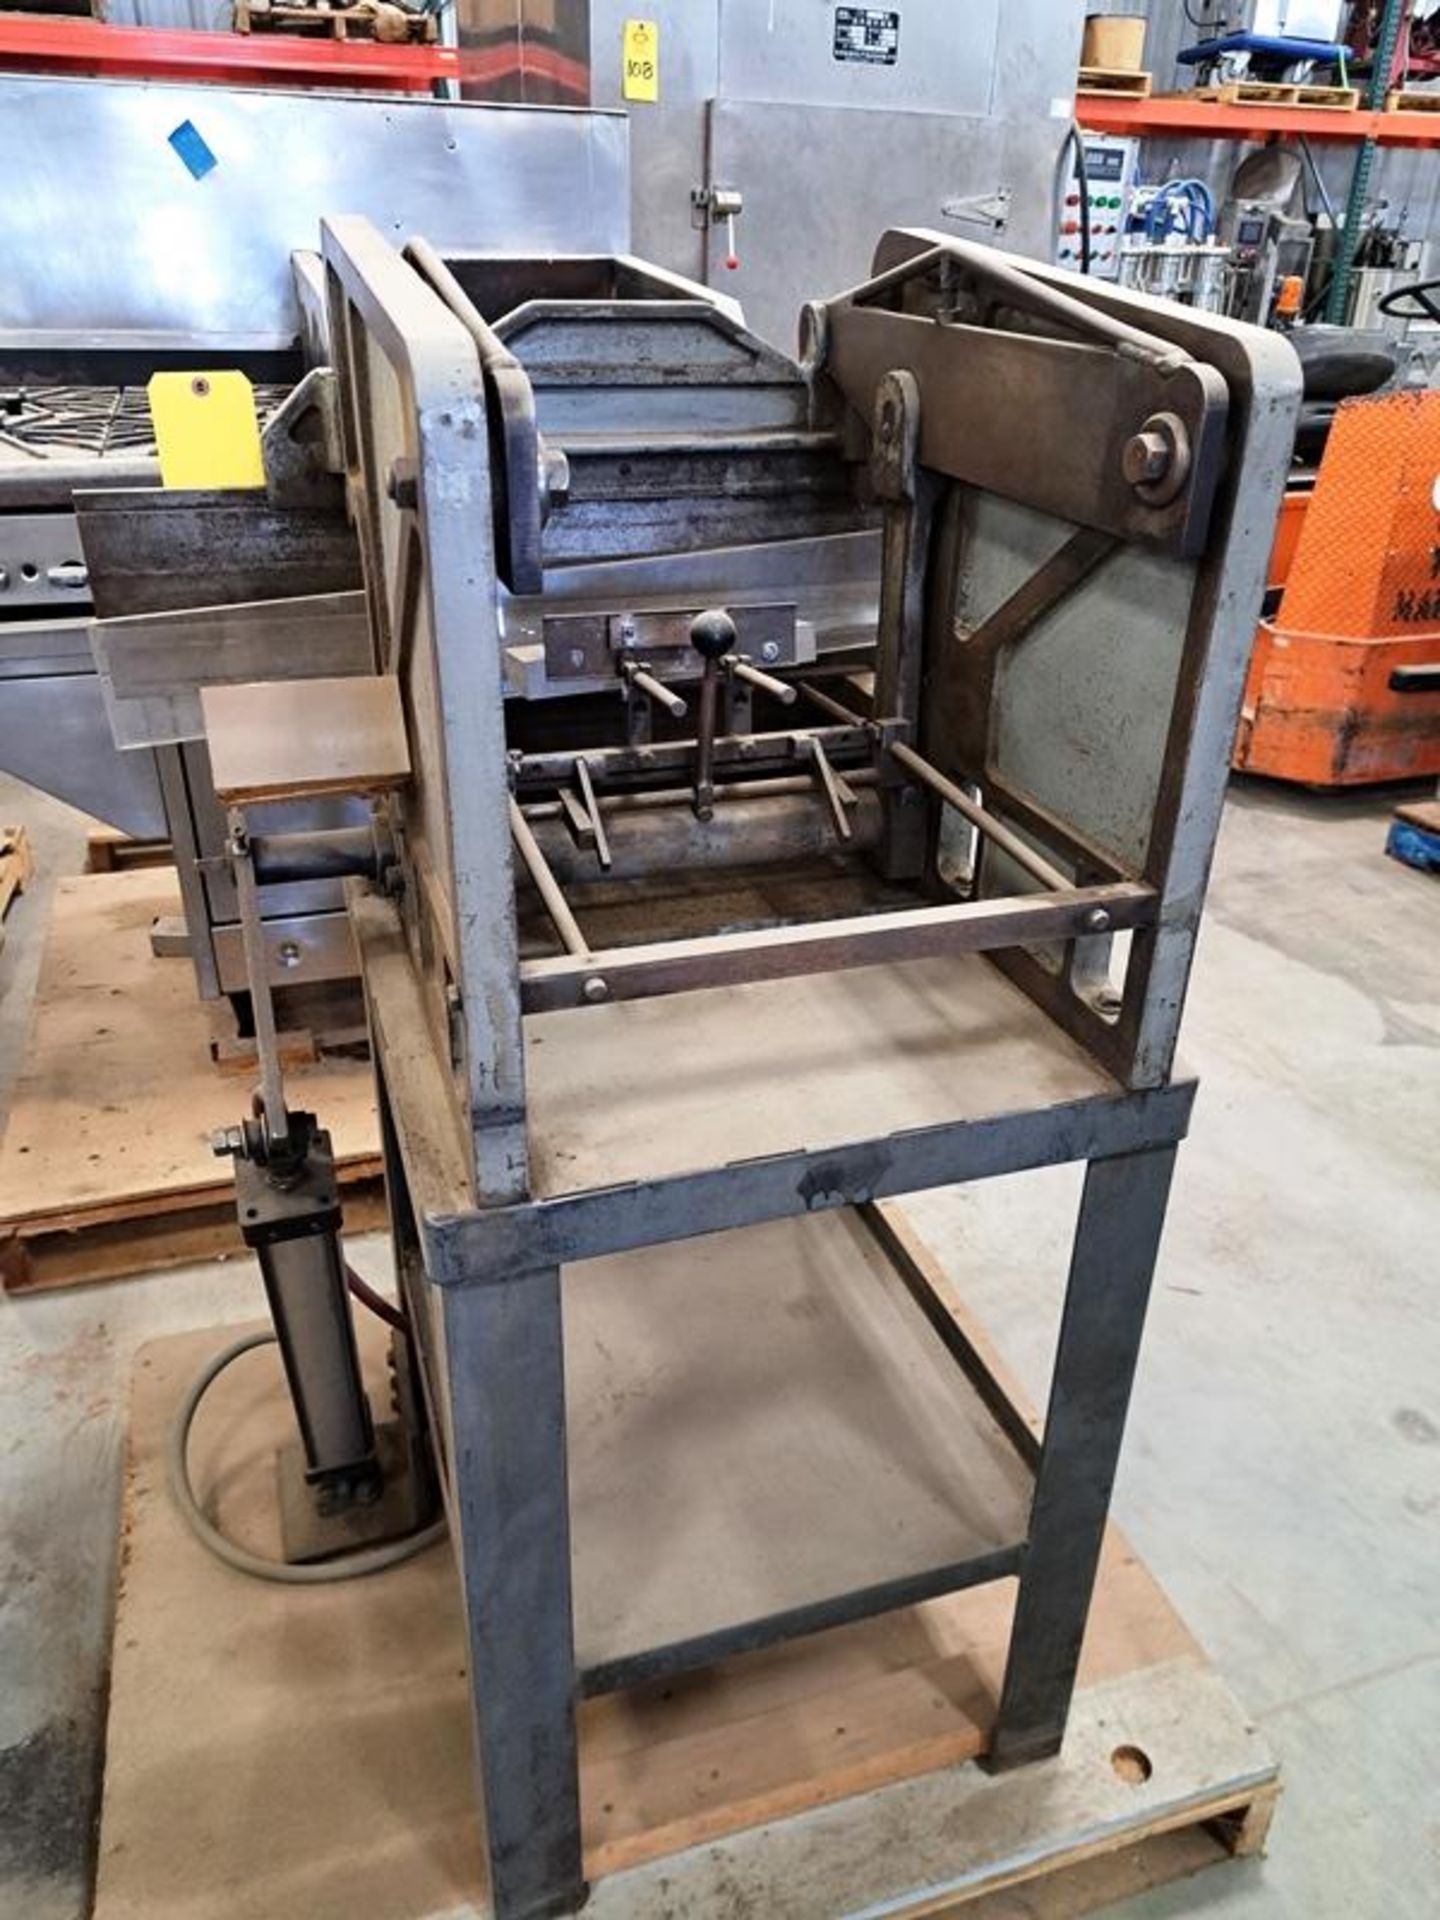 Di-Arco Press Brake, 36" wide, Ser. #1553 (Required Loading Fee: $25.00) NO HAND CARRY (Price Is For - Image 2 of 2